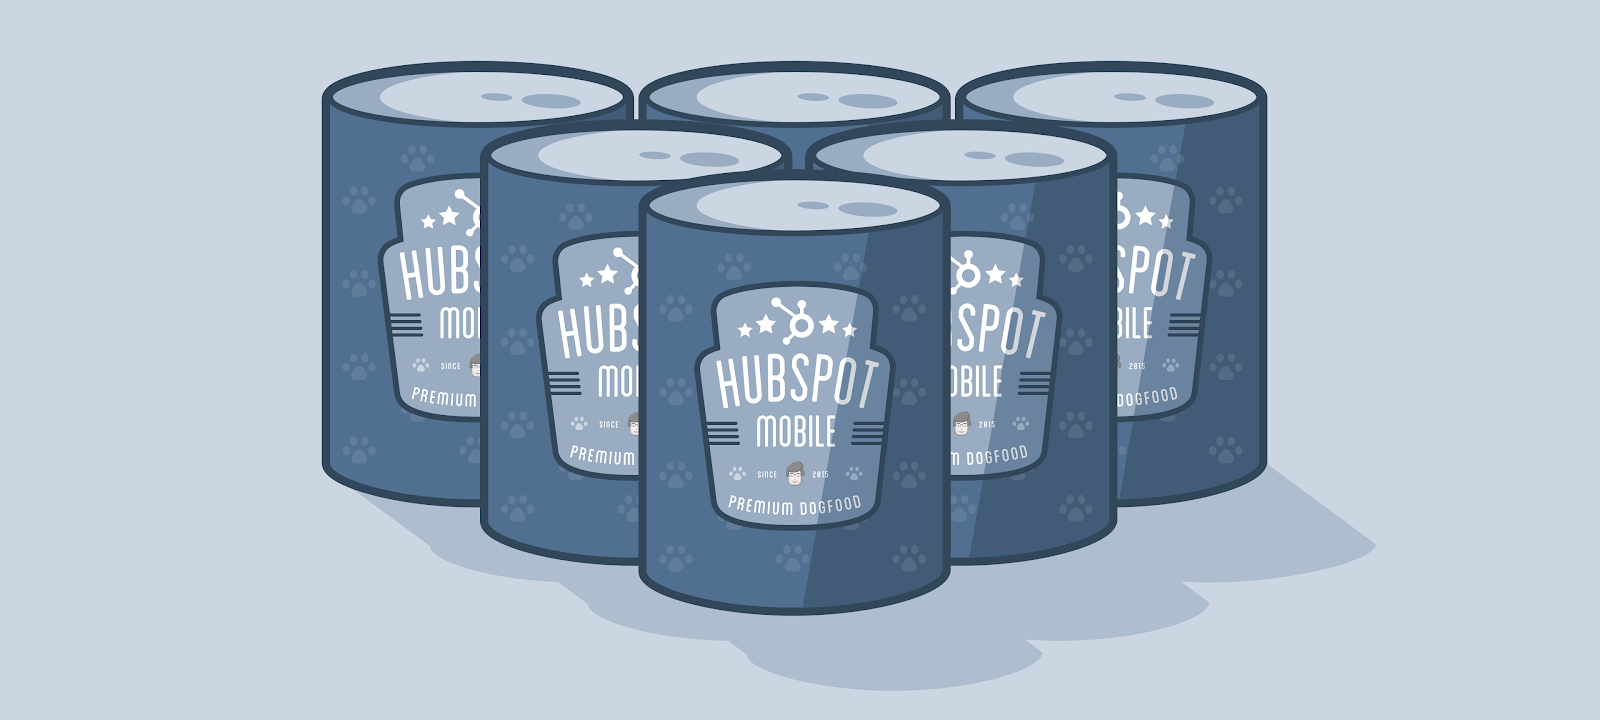 Cans of dog food, but the labels read "HubSpot Mobile"